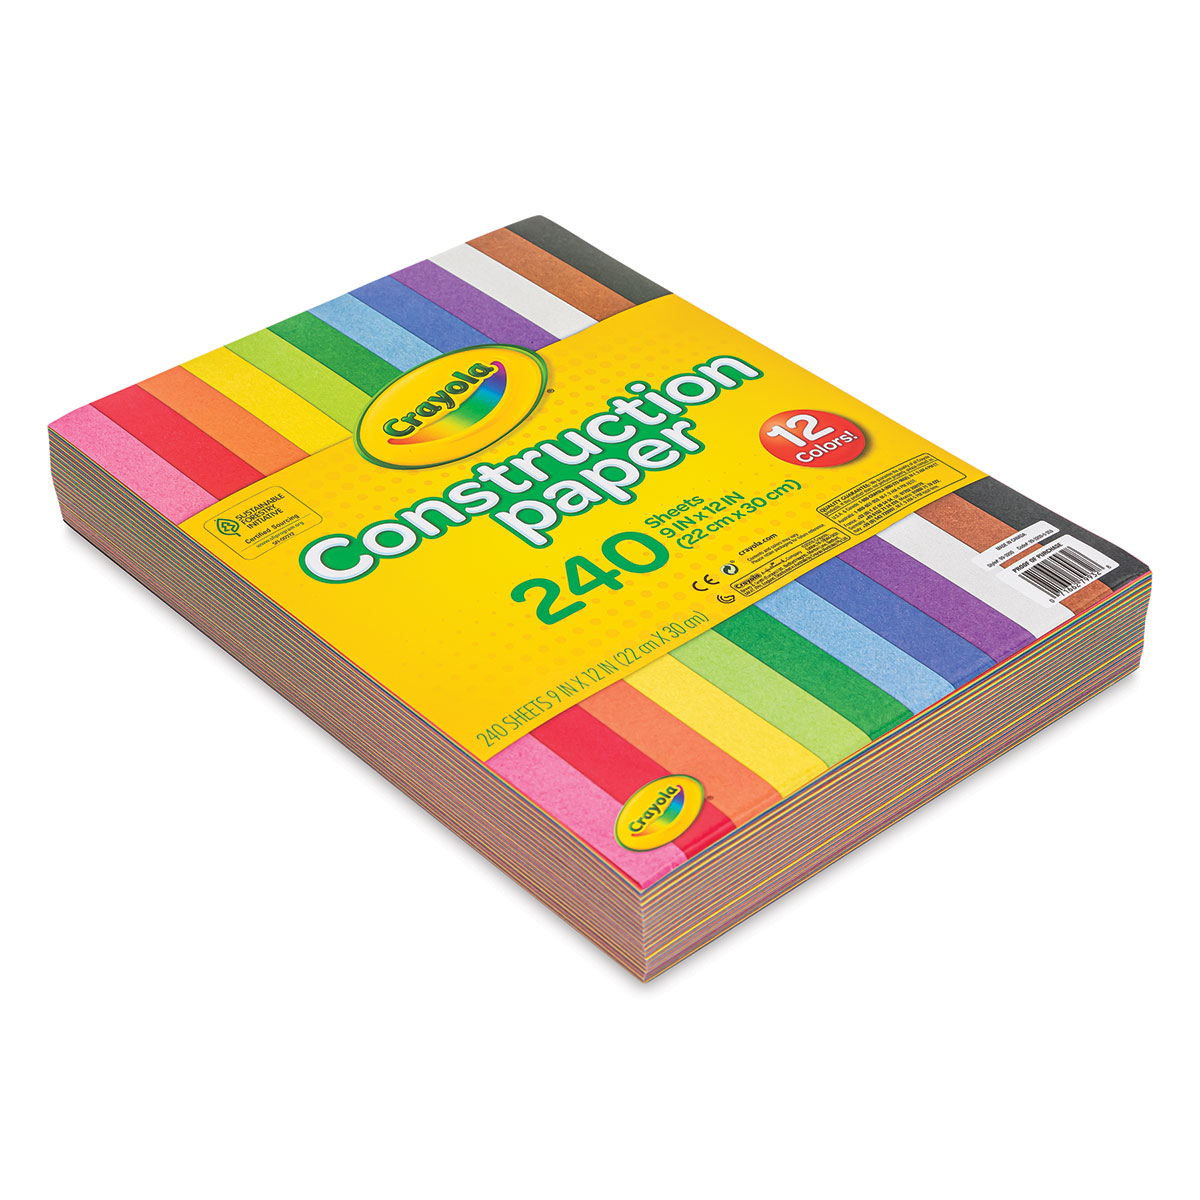 Crayola 12 Color Construction Paper, Assorted Colors, 240 Sheets